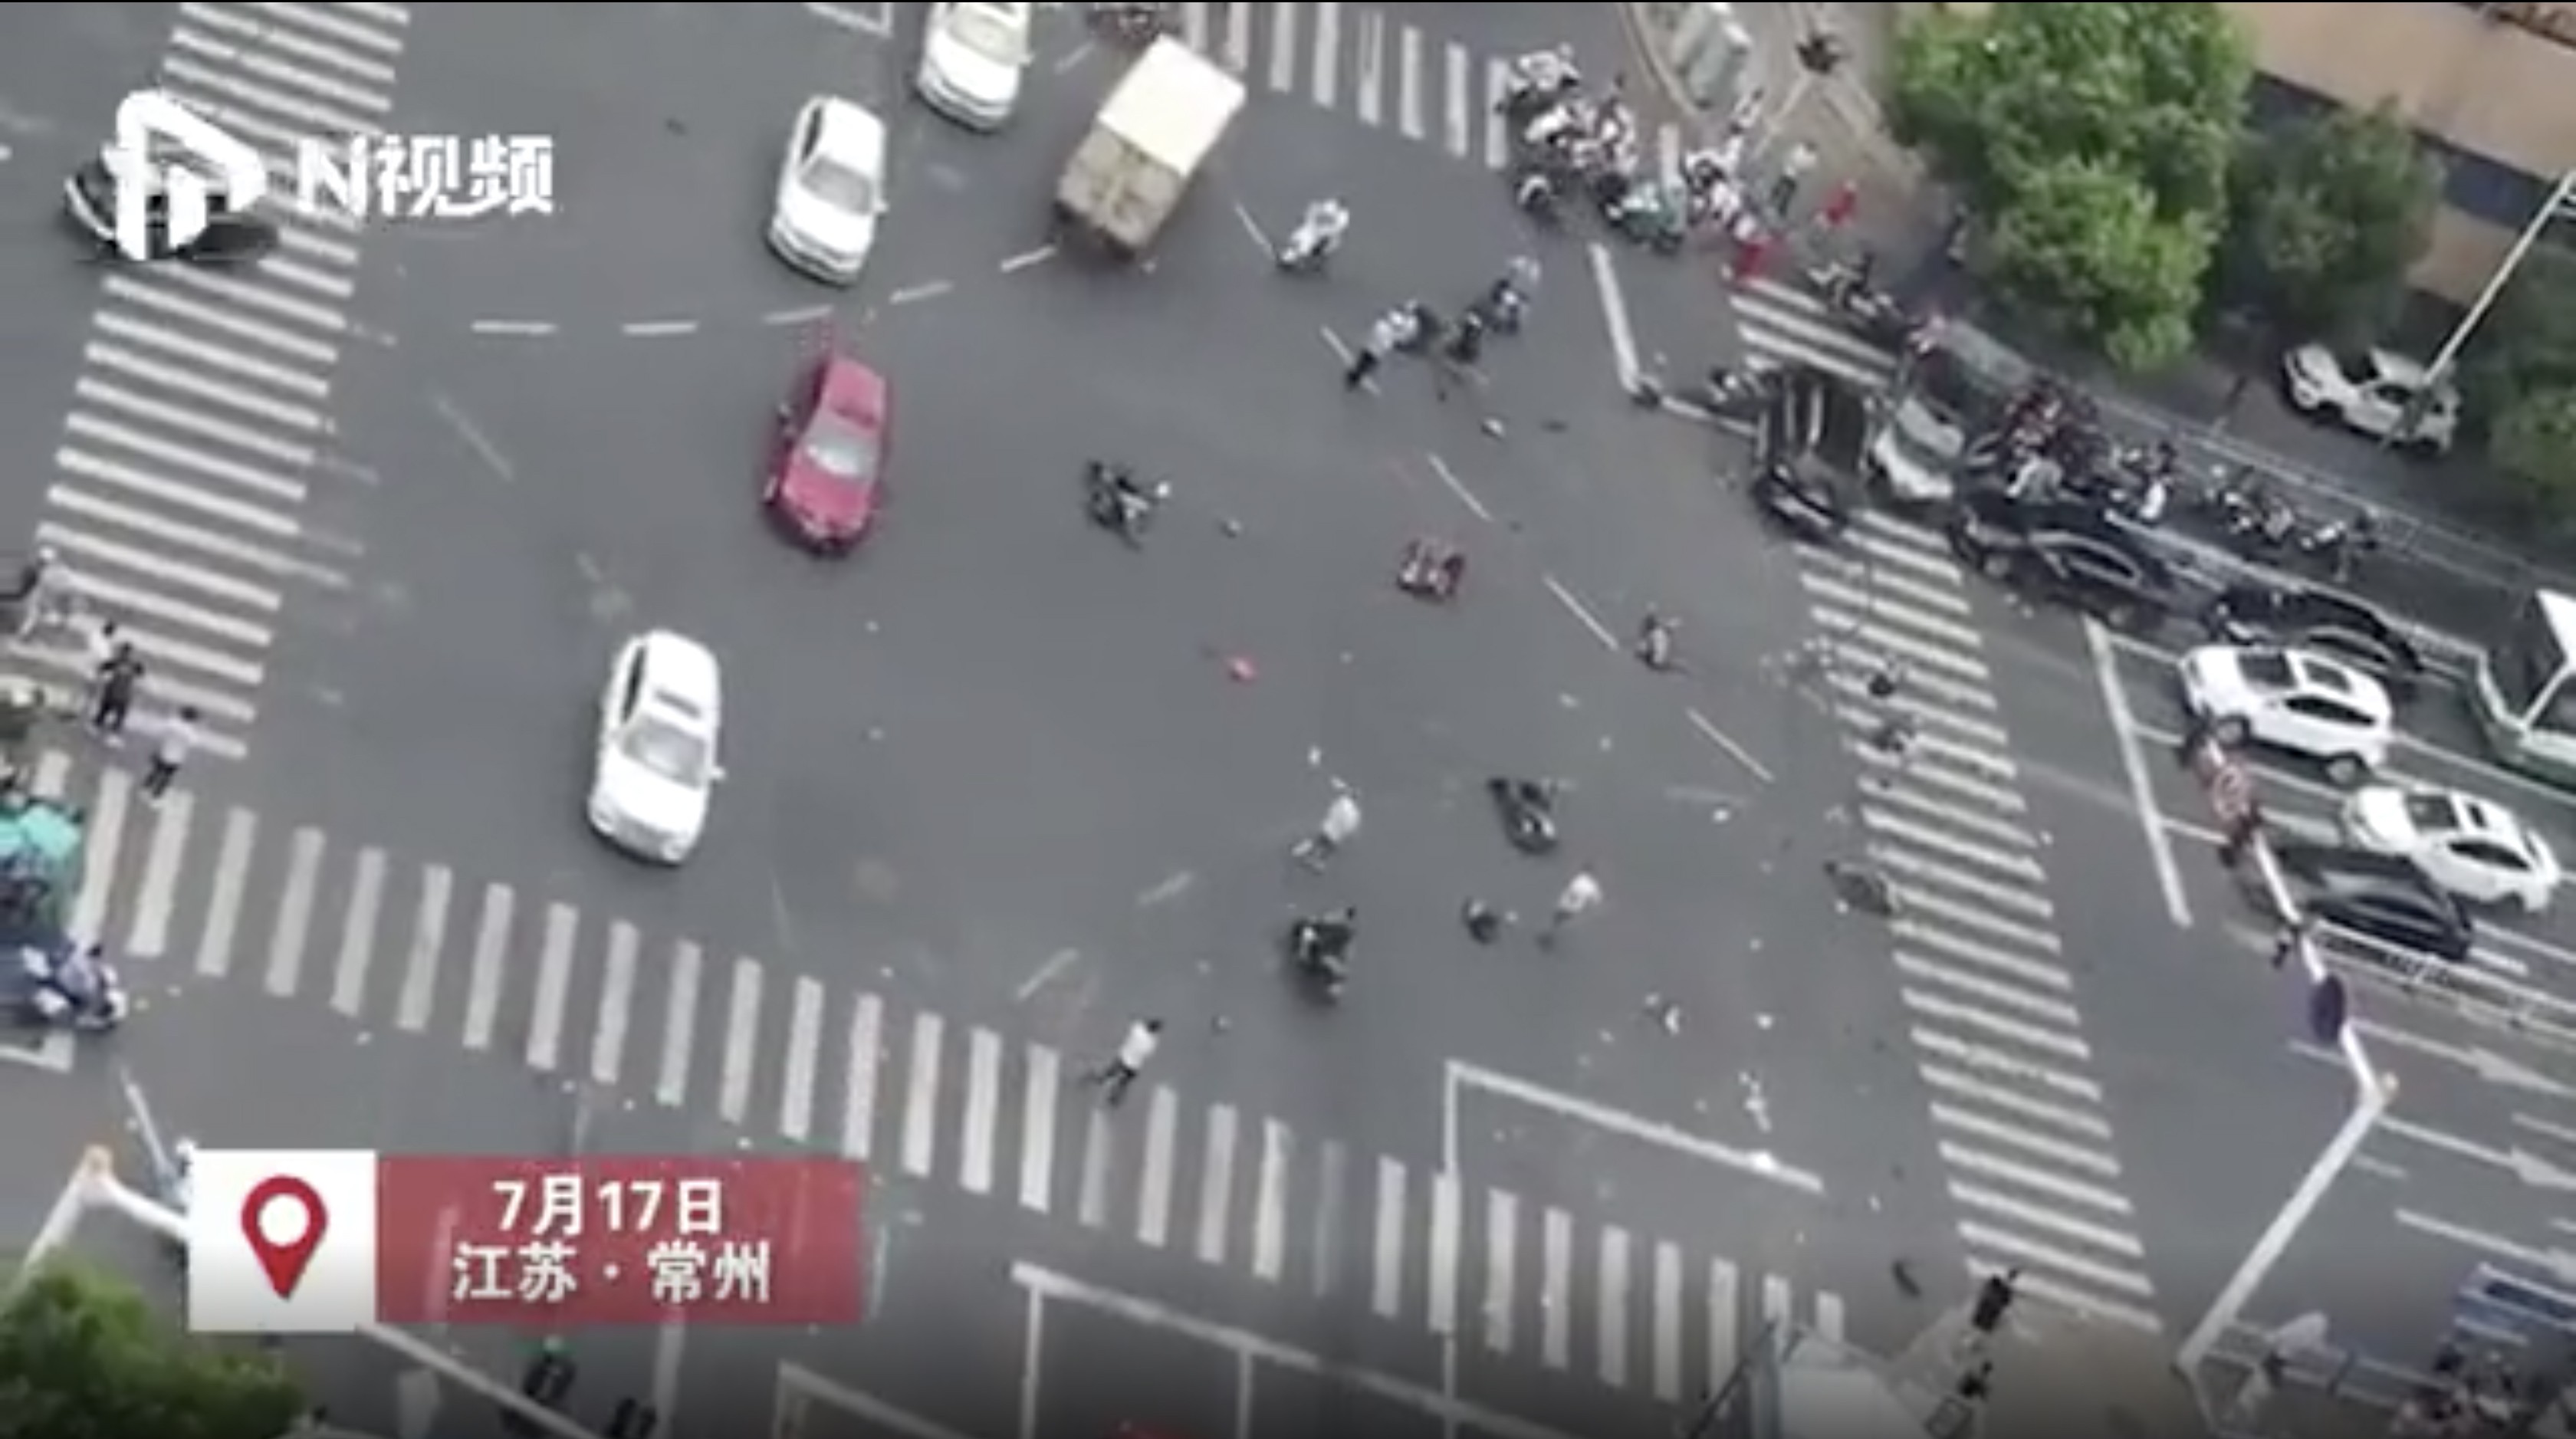 Police in Changzhou, Jiangsu province, said three people were fatally injured when a car ran into commuters at a road junction. Photo: News.163